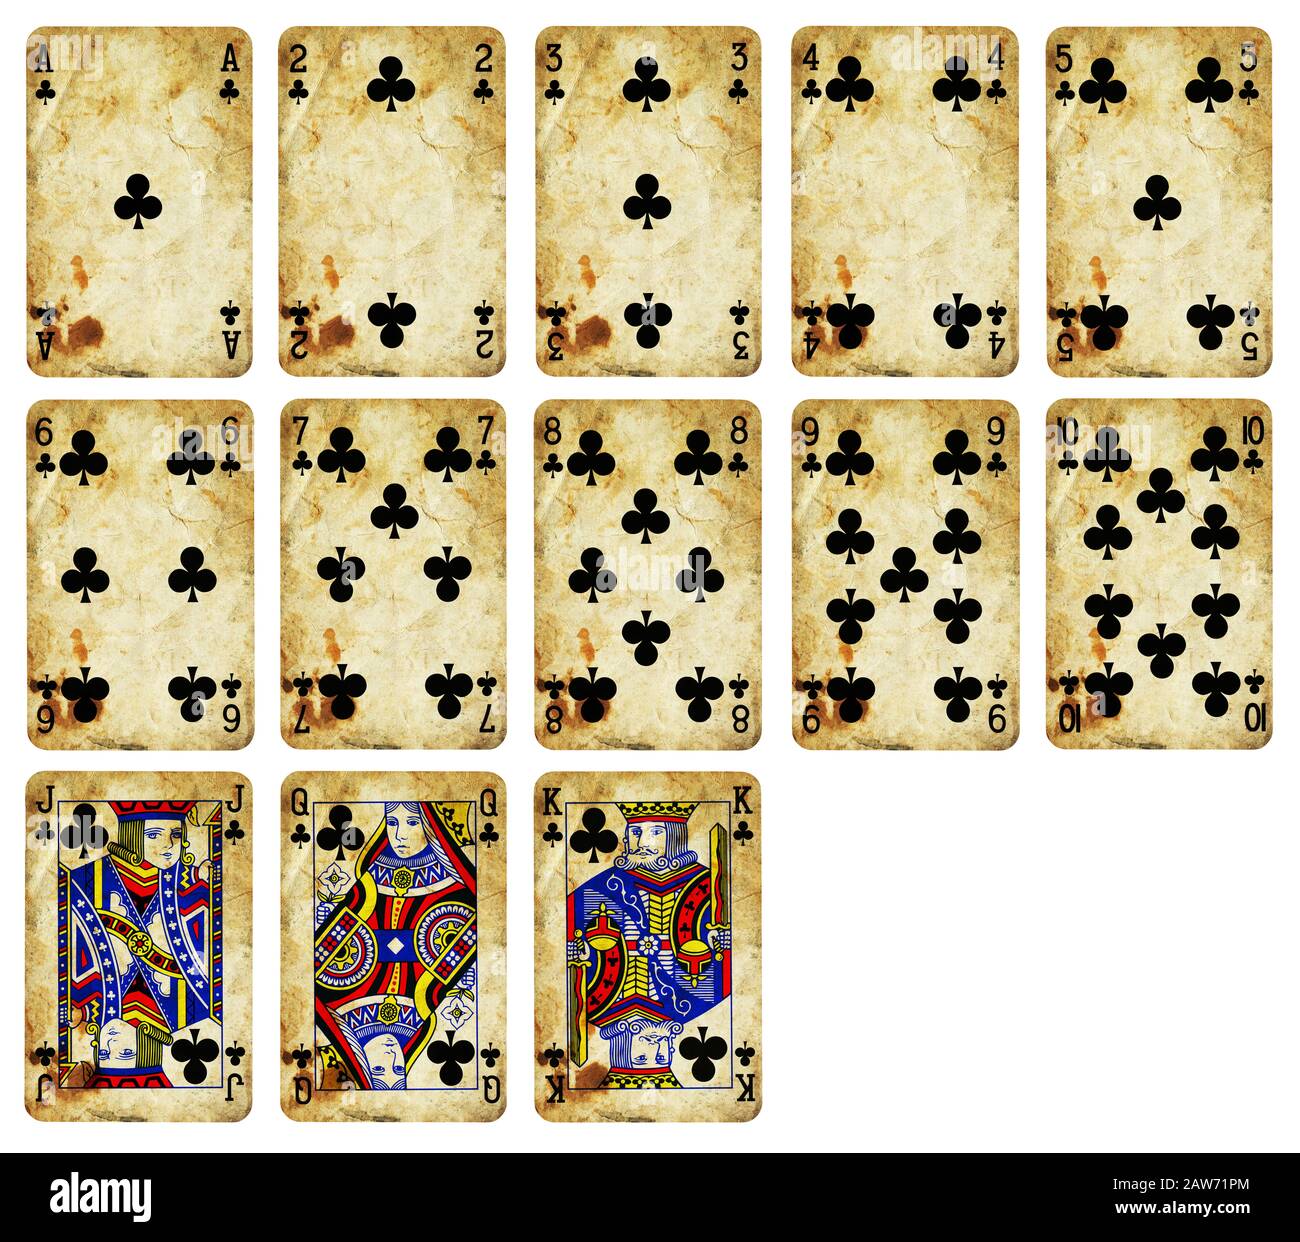 Playing cards of Clubs suit, isolated on white background - High quality. Stock Photo